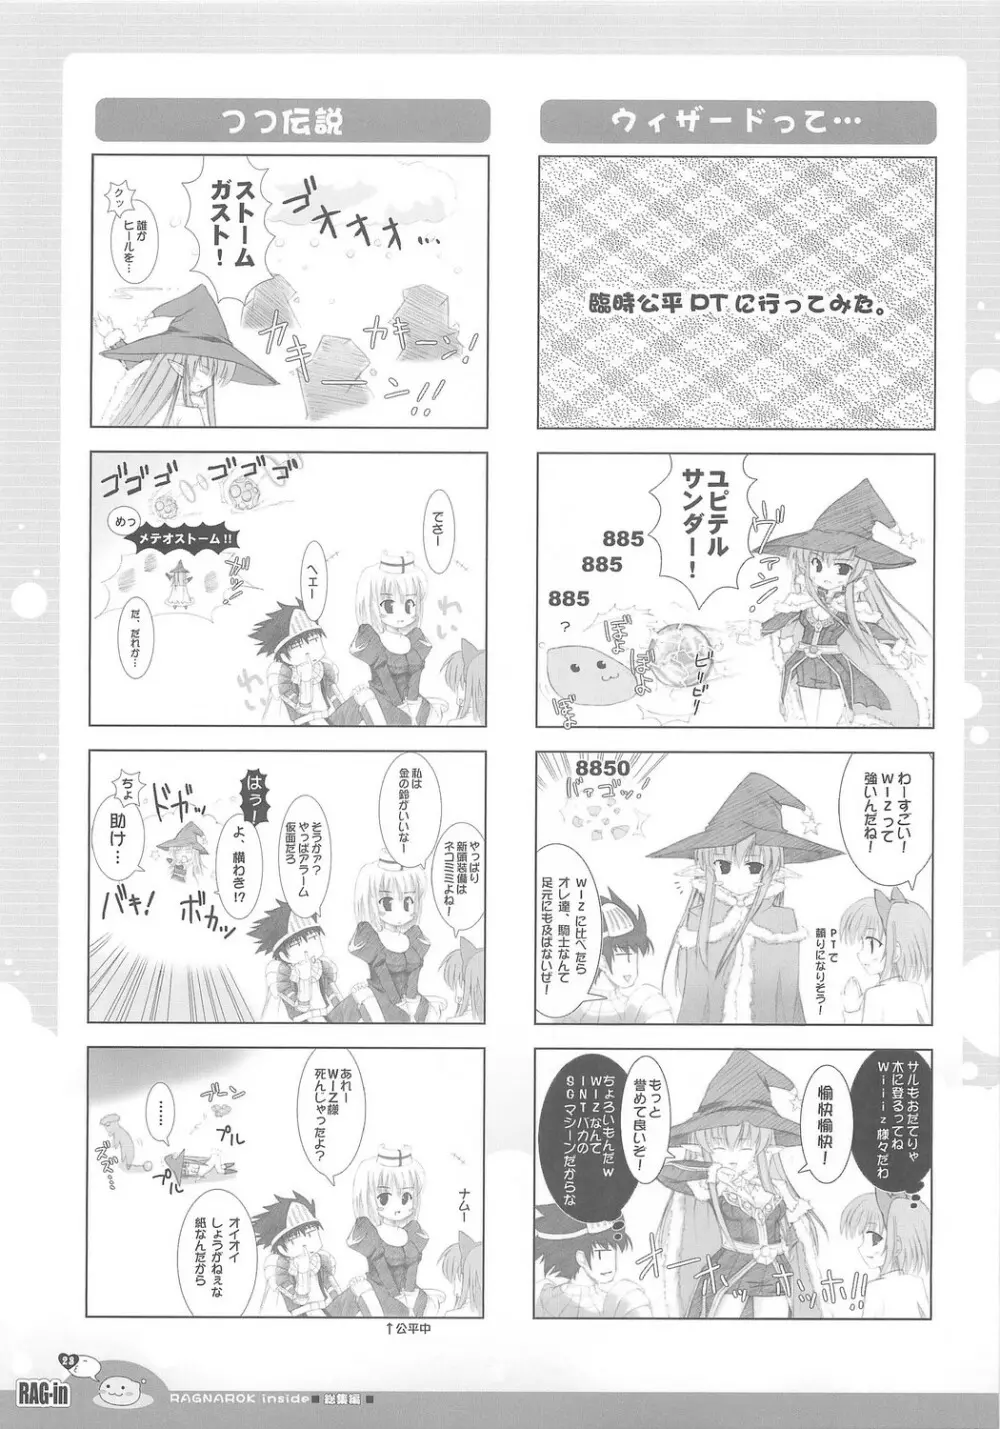 RAG-in 1～10 総集編 Page.27